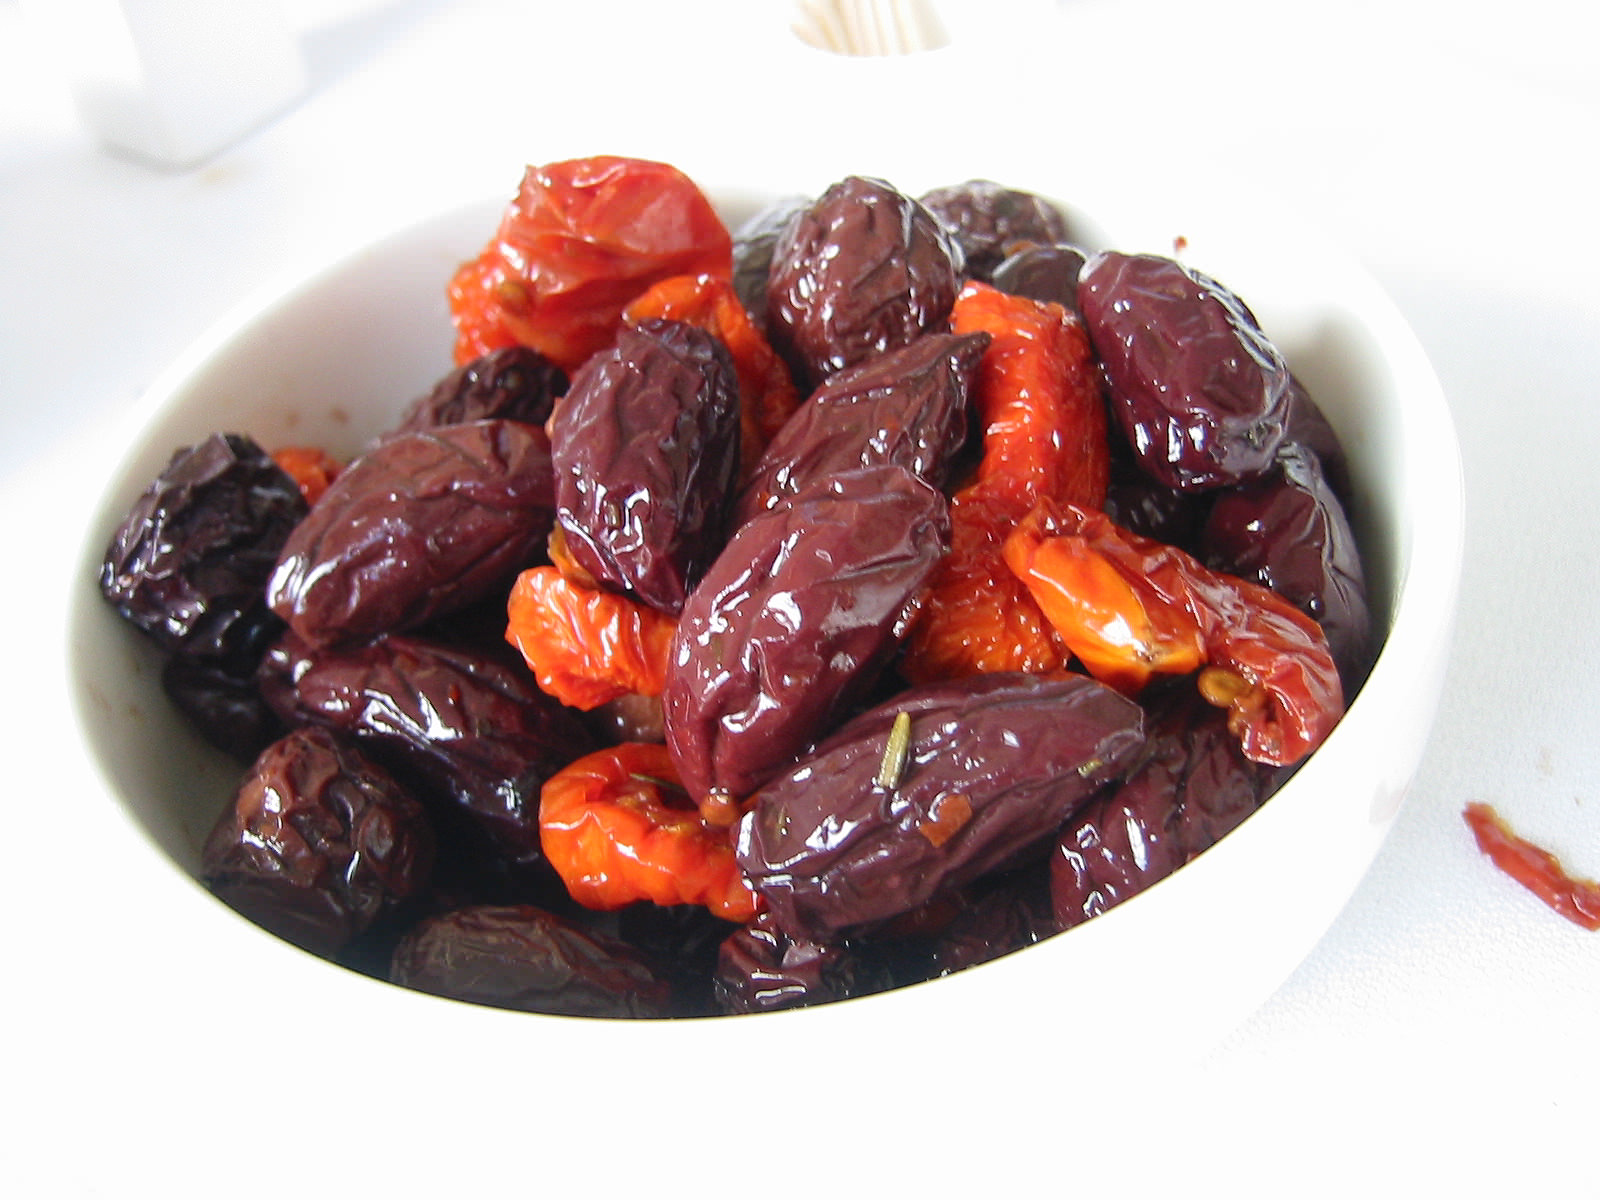 Sundried olives and tomatoes